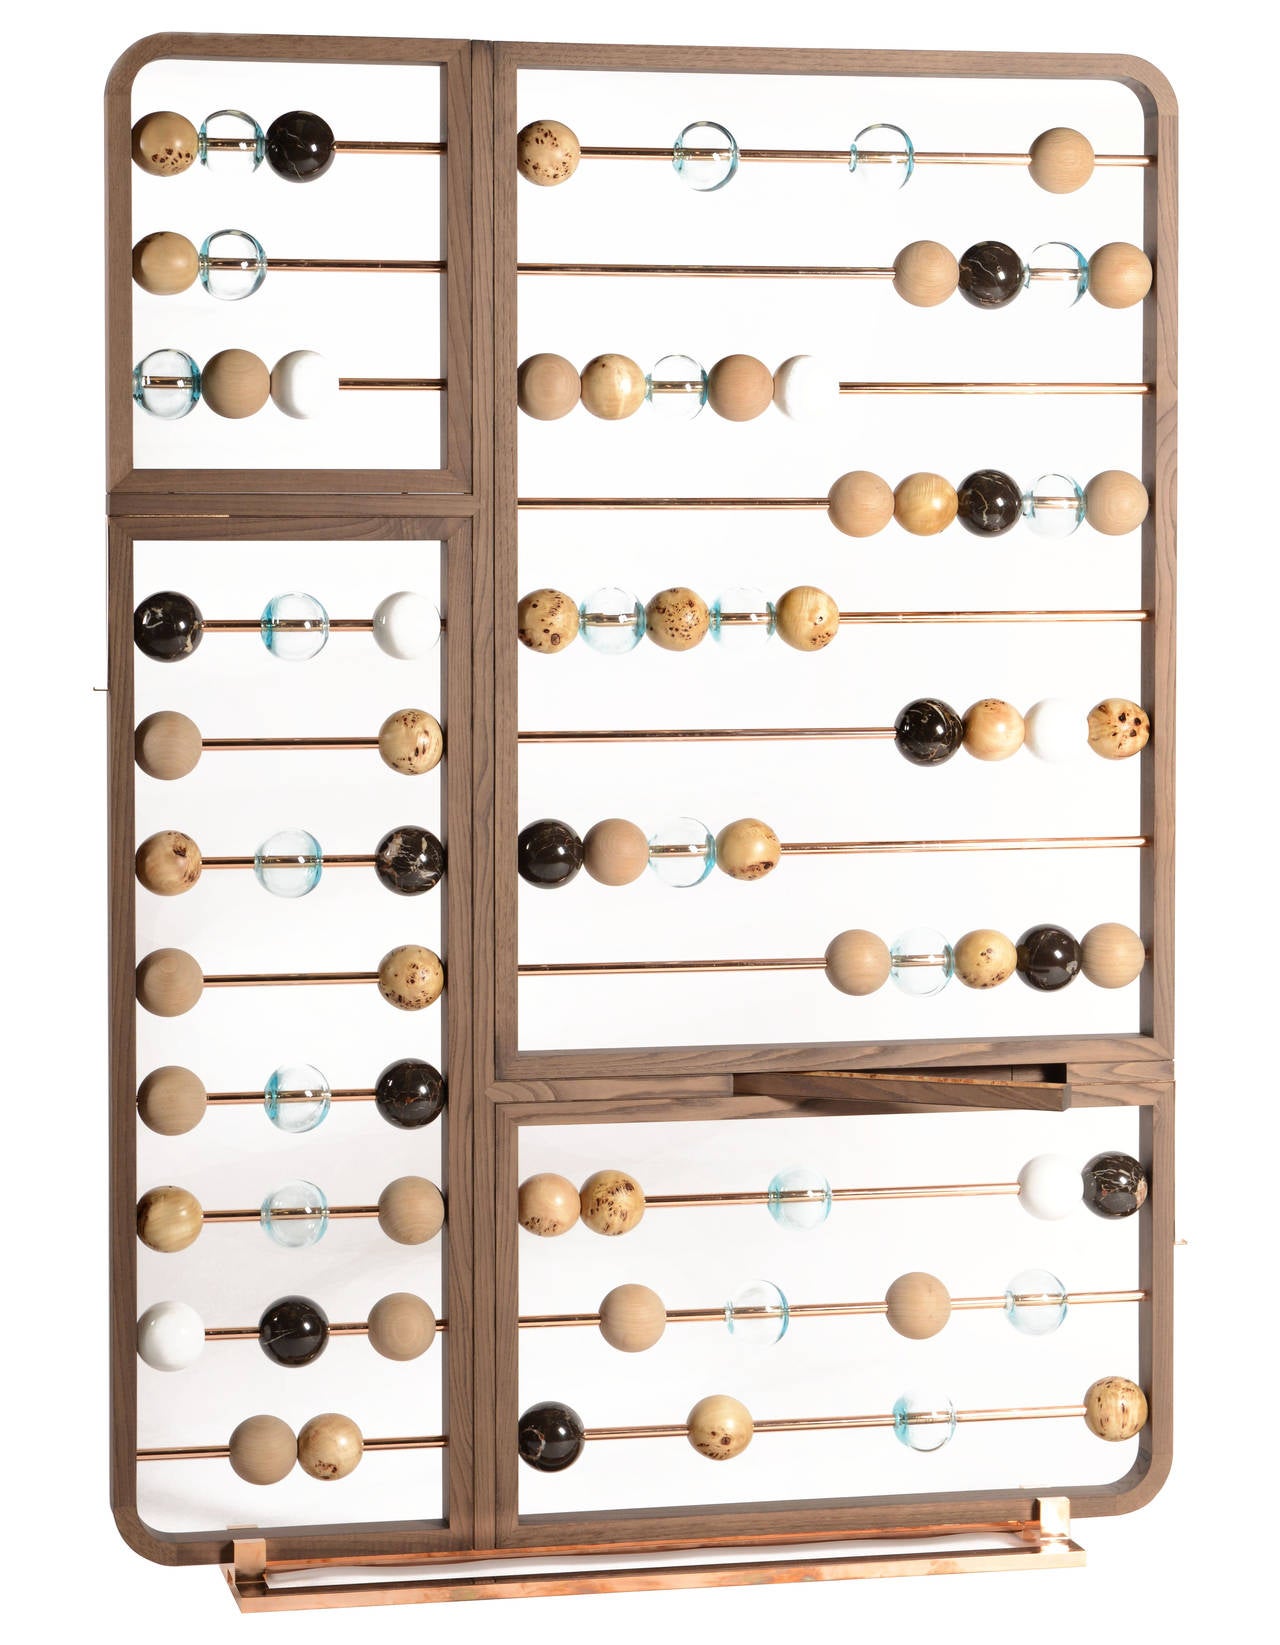 A masterpiece of design and craftsmanship, the giant abacus “The Rivers of Time” (“Les Rivie`res du Temps”) is a special edition work created for the AD Collections 2015 exhibition in Paris at the Ministry of Foreign Affaires, Quai d’Orsay. This